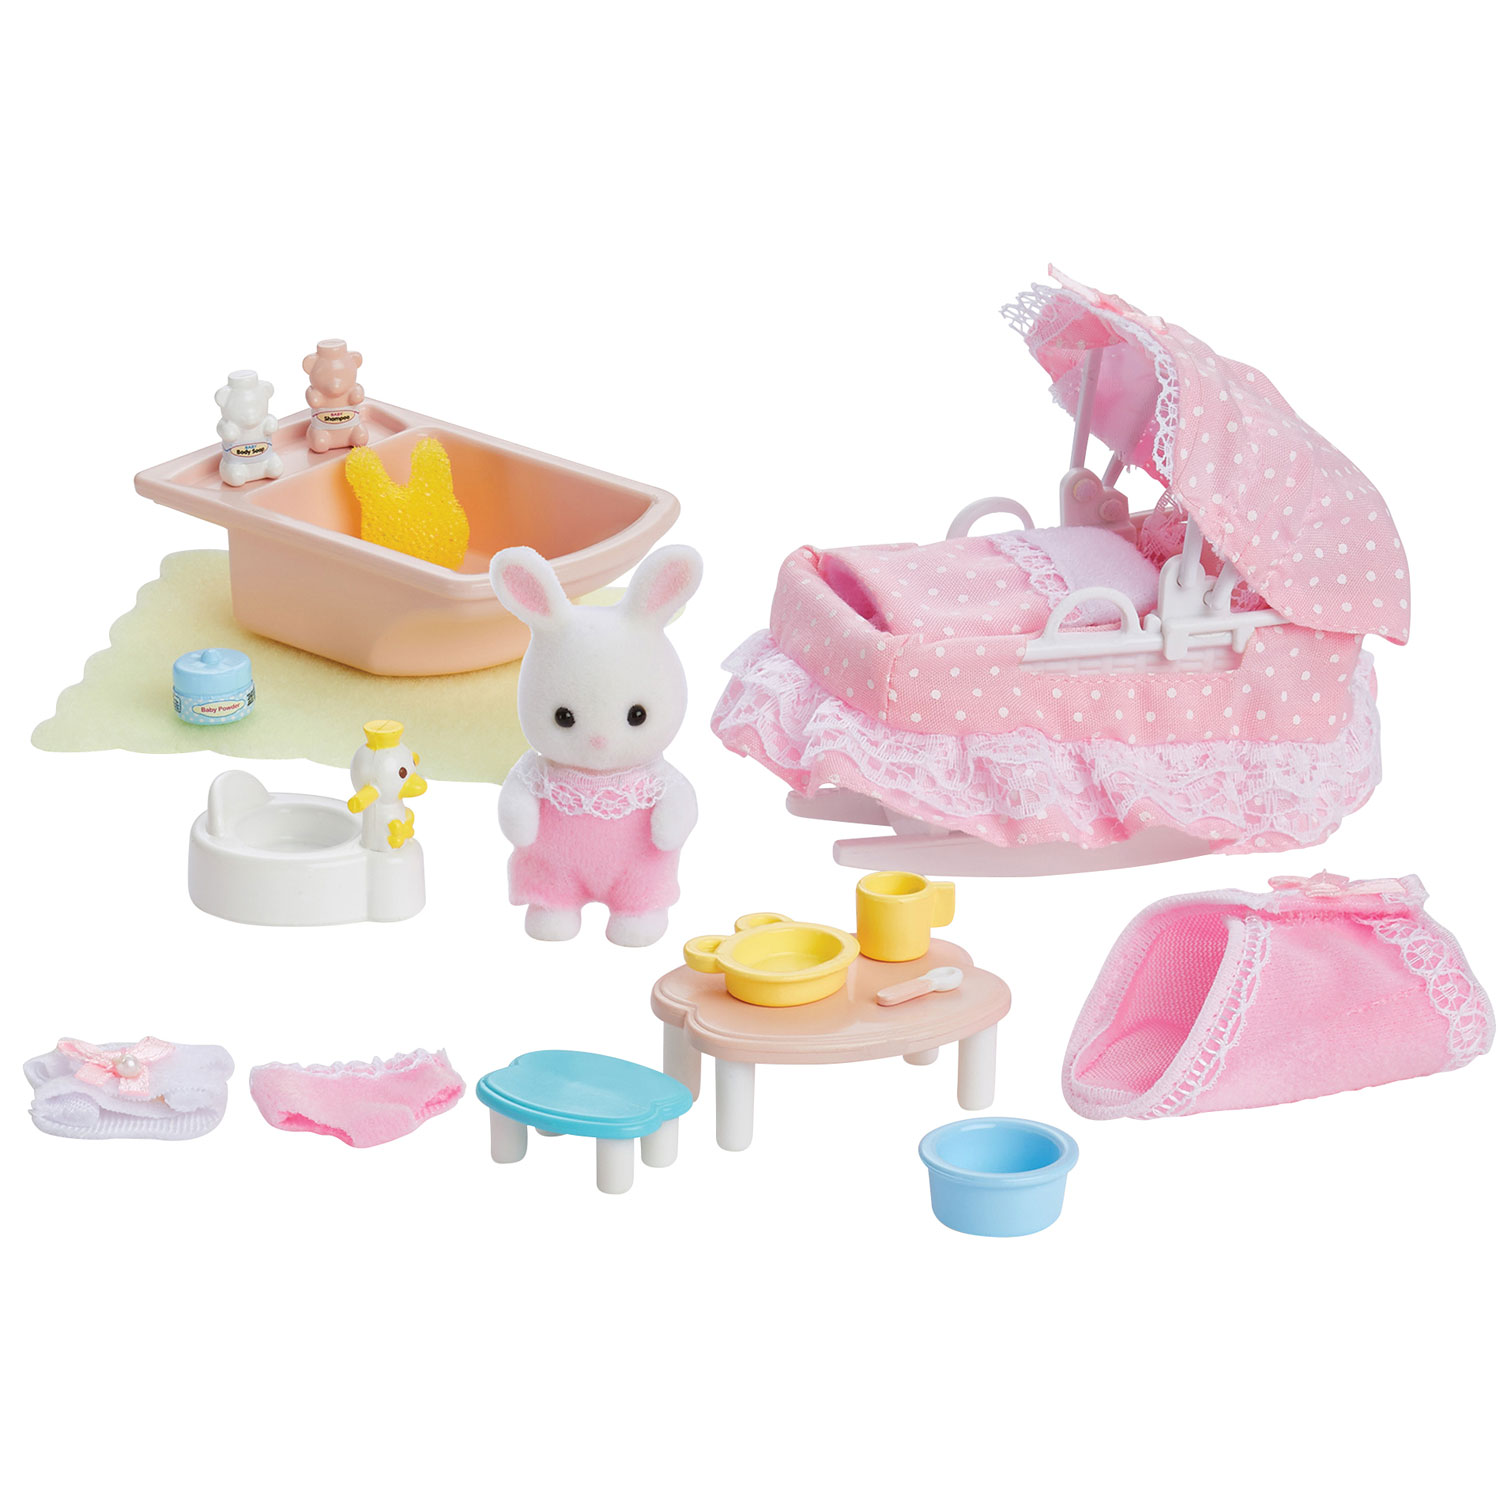 Calico Critters Sophie's Love 'n Care Playset